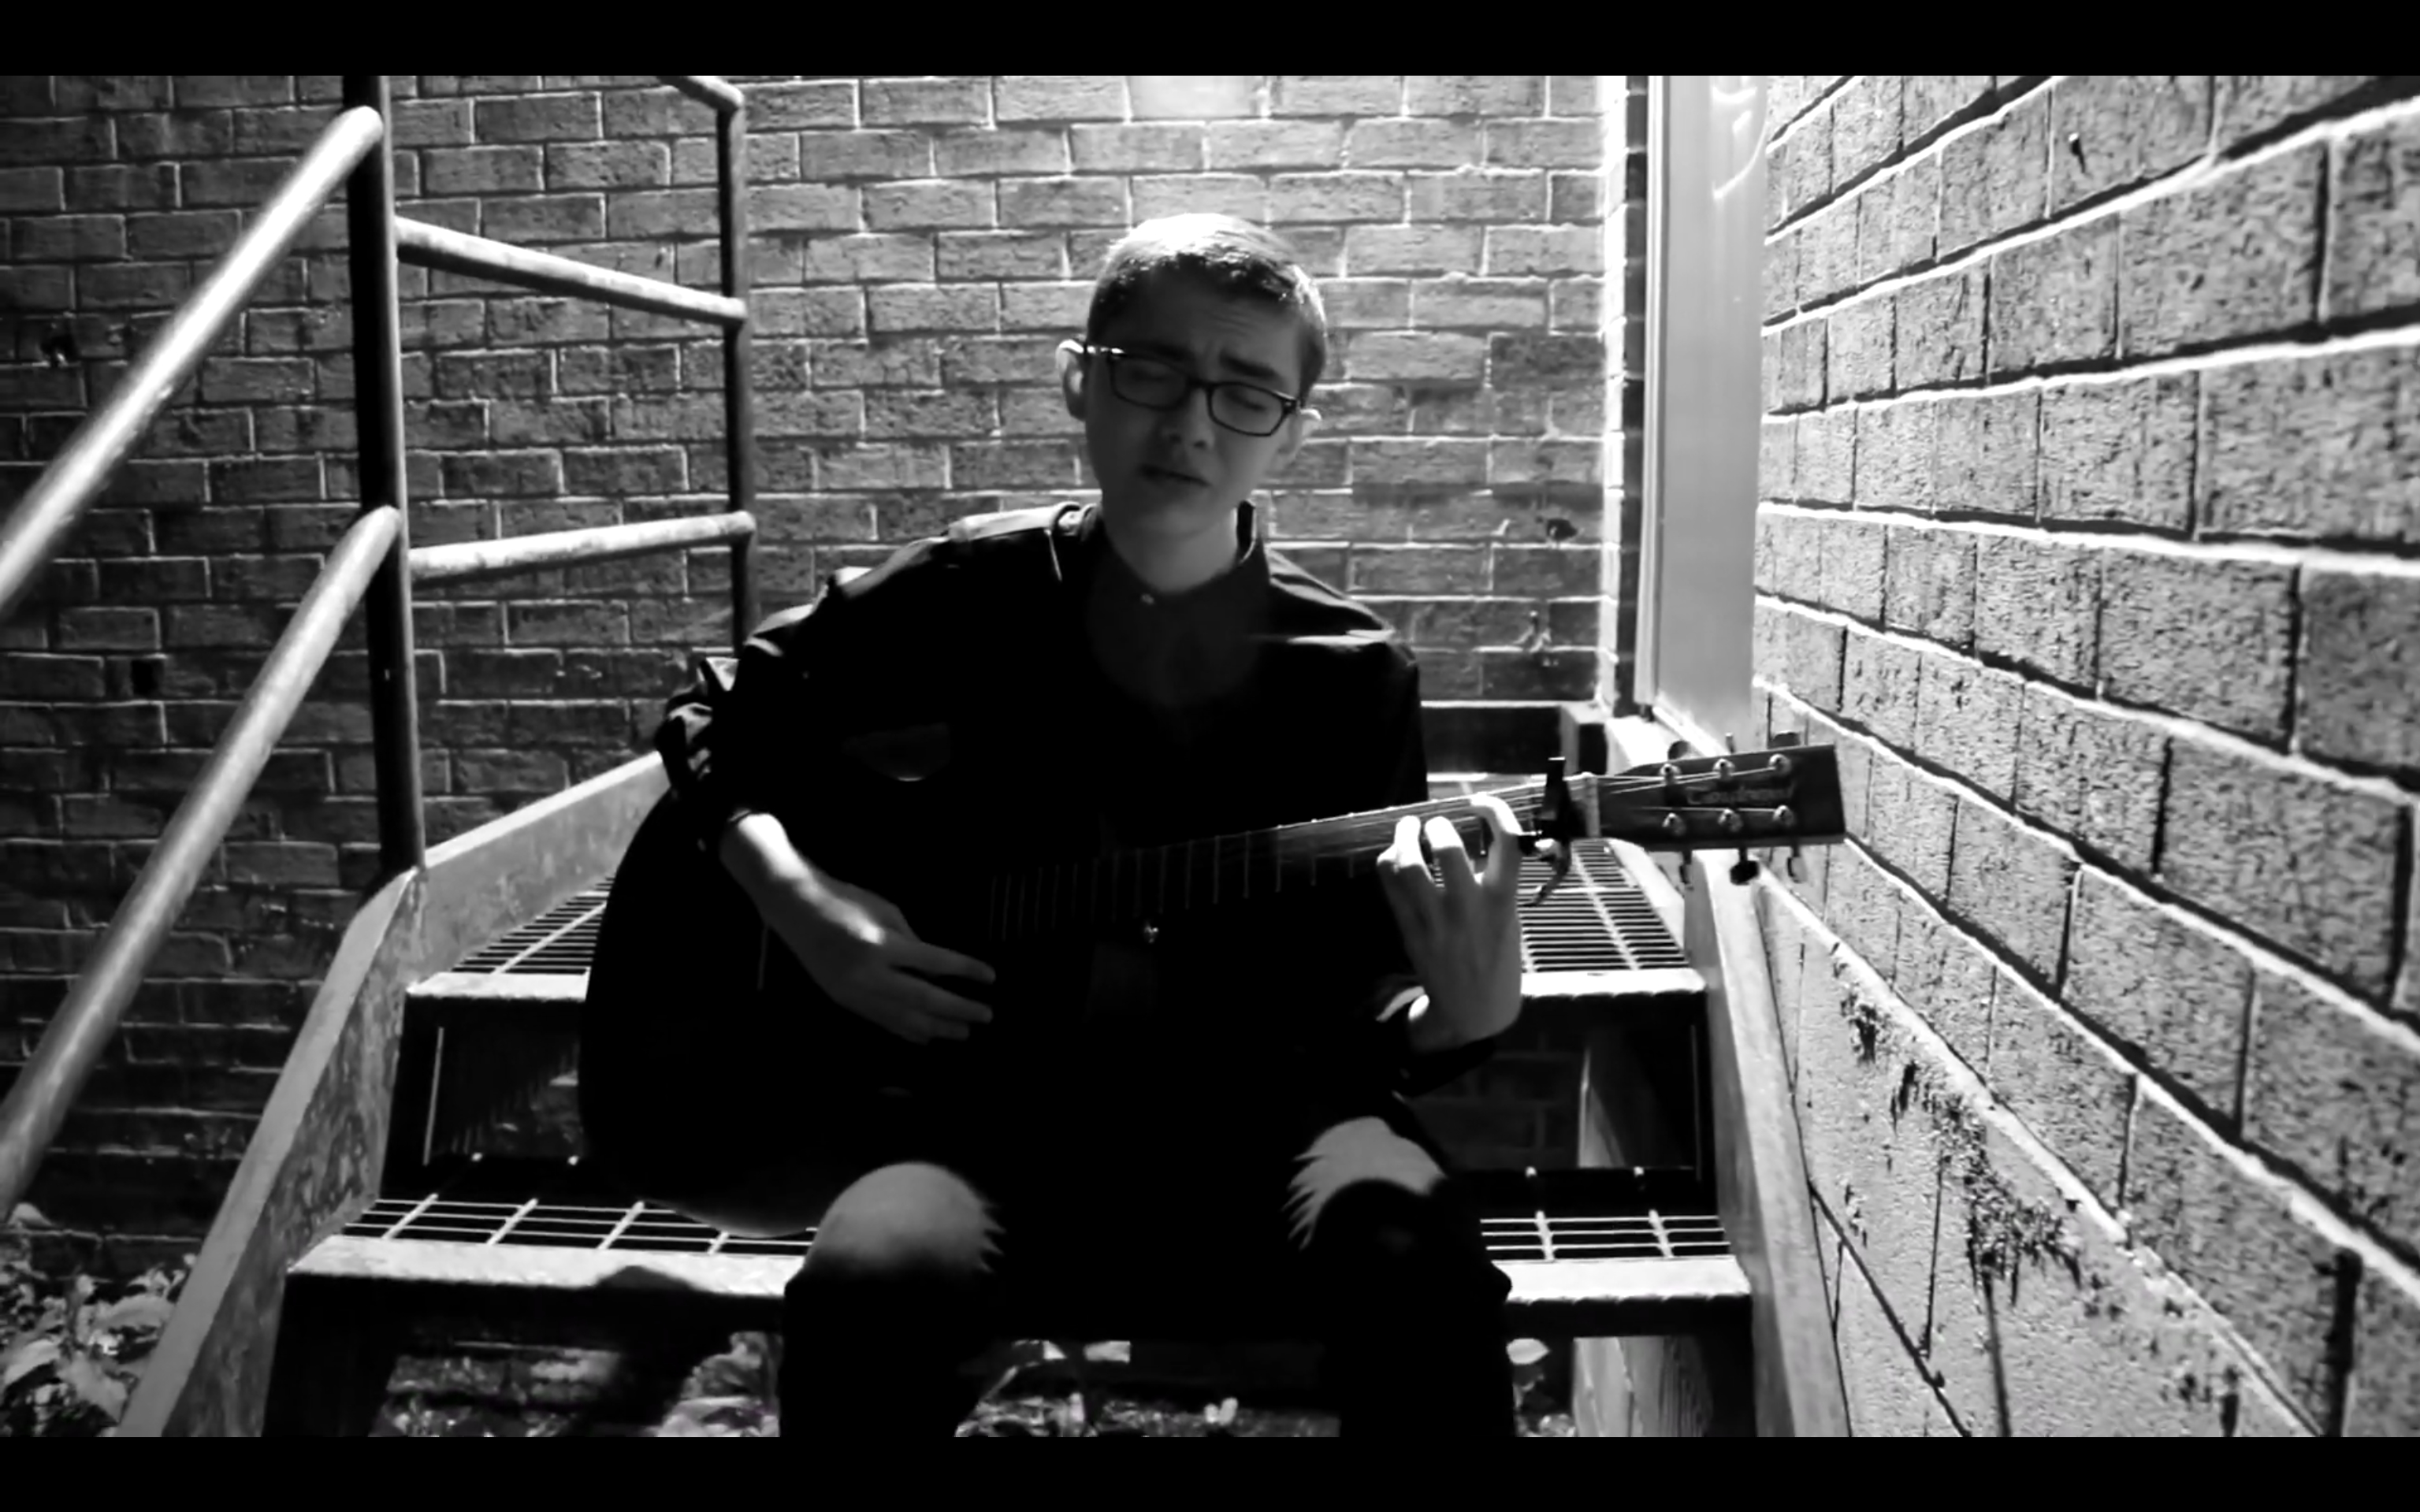 Elliott Fullam in Music Video: I Don't Want To Set The World On Fire